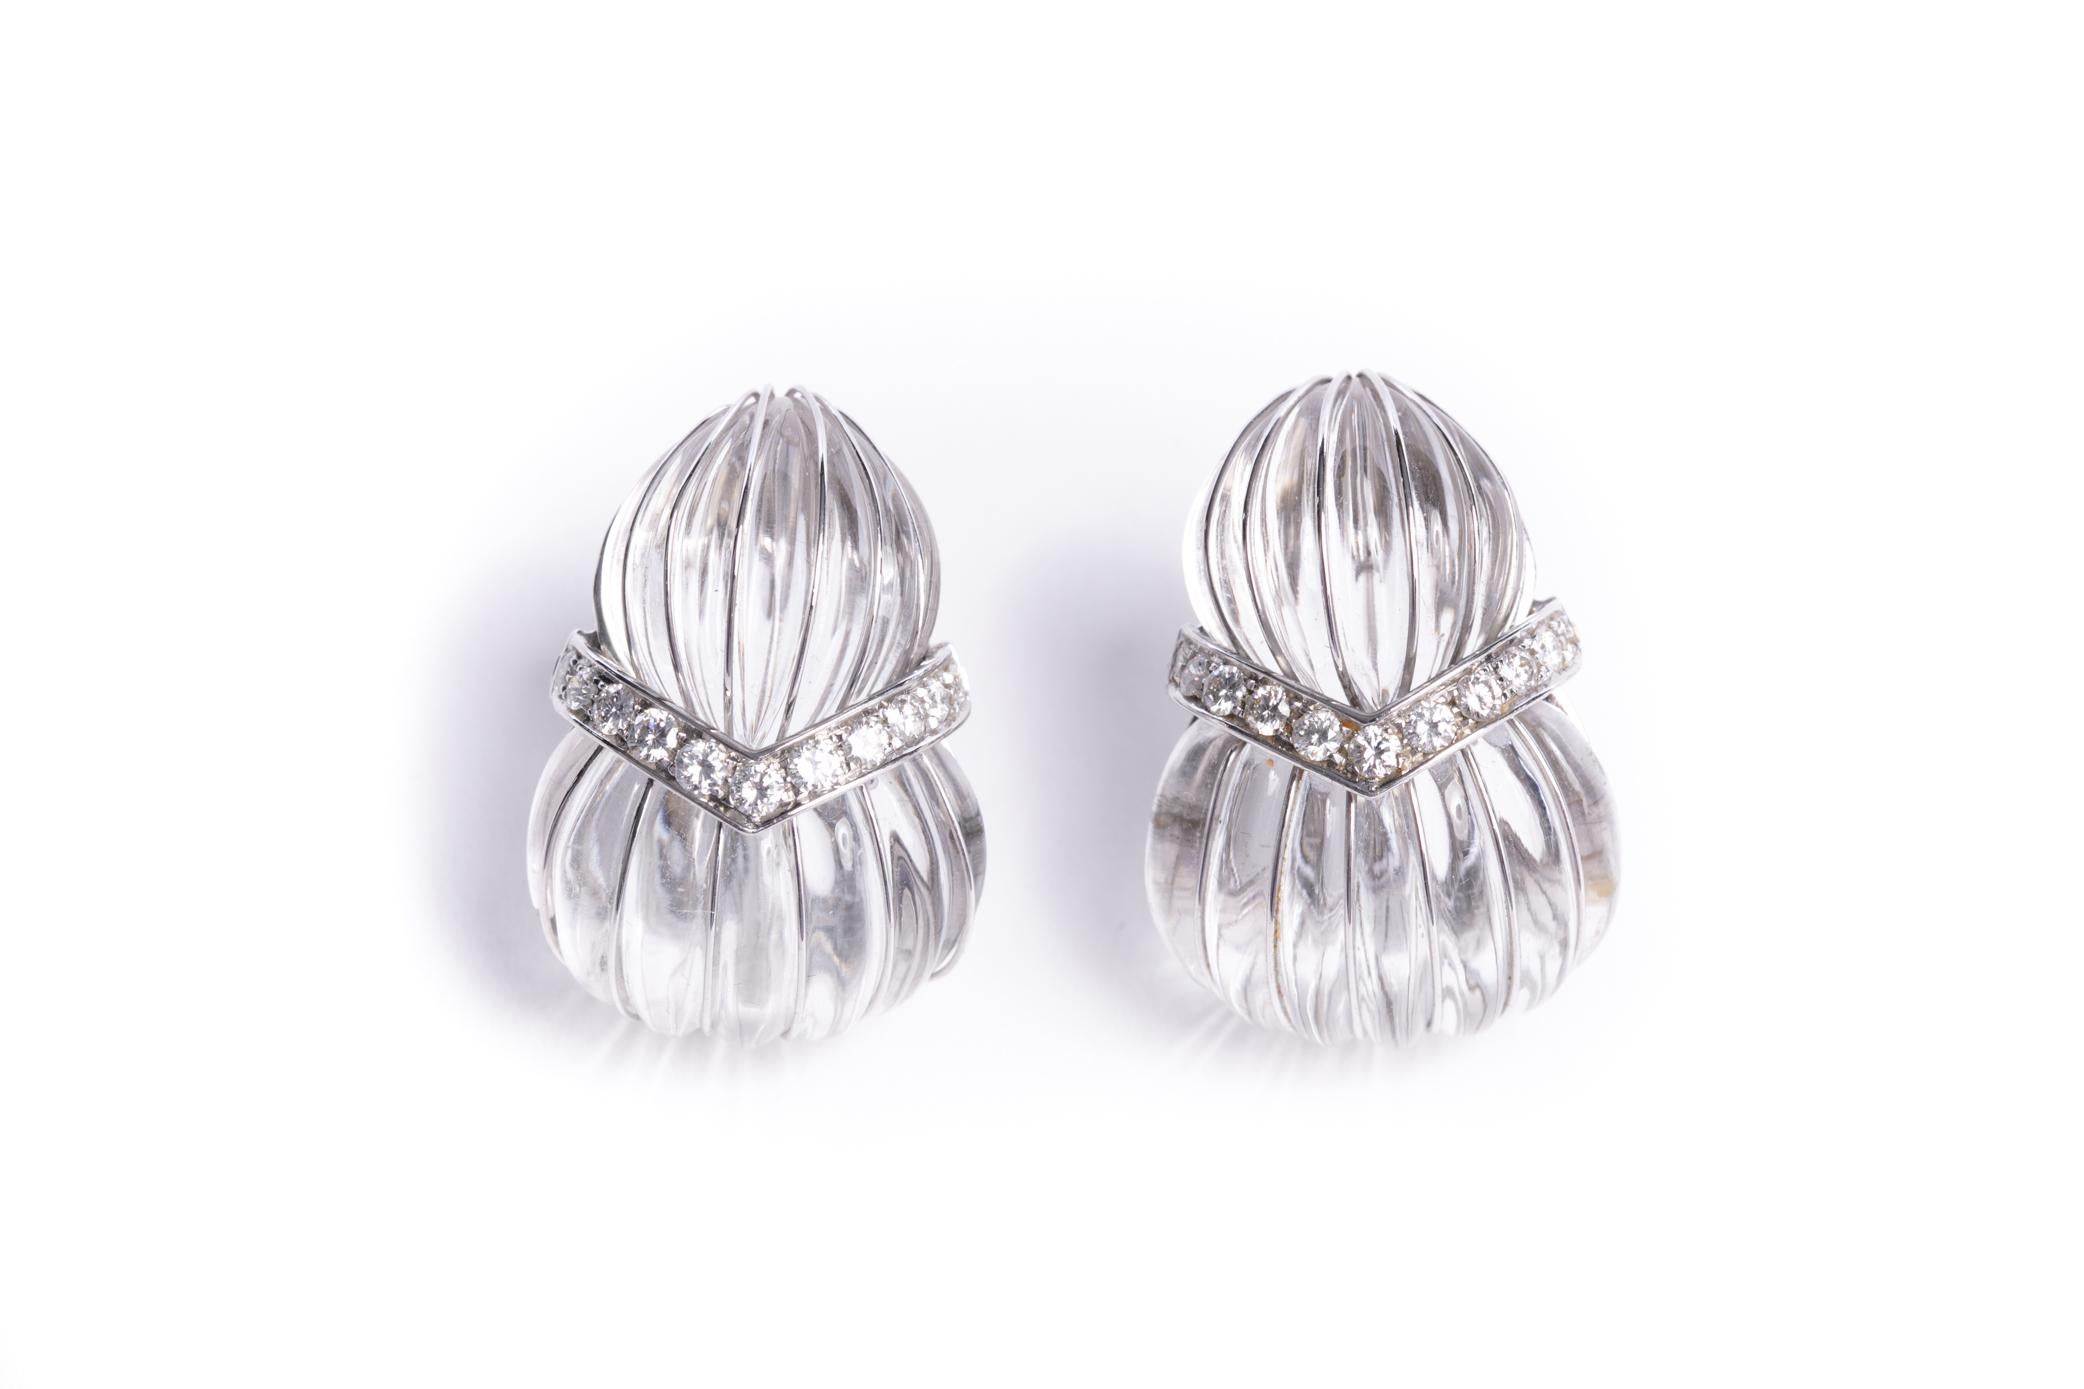 Beautiful David Webb rock crystal earrings with diamonds set in platinum circa 1970's. A wonderful example of Webb's most iconic styles.
